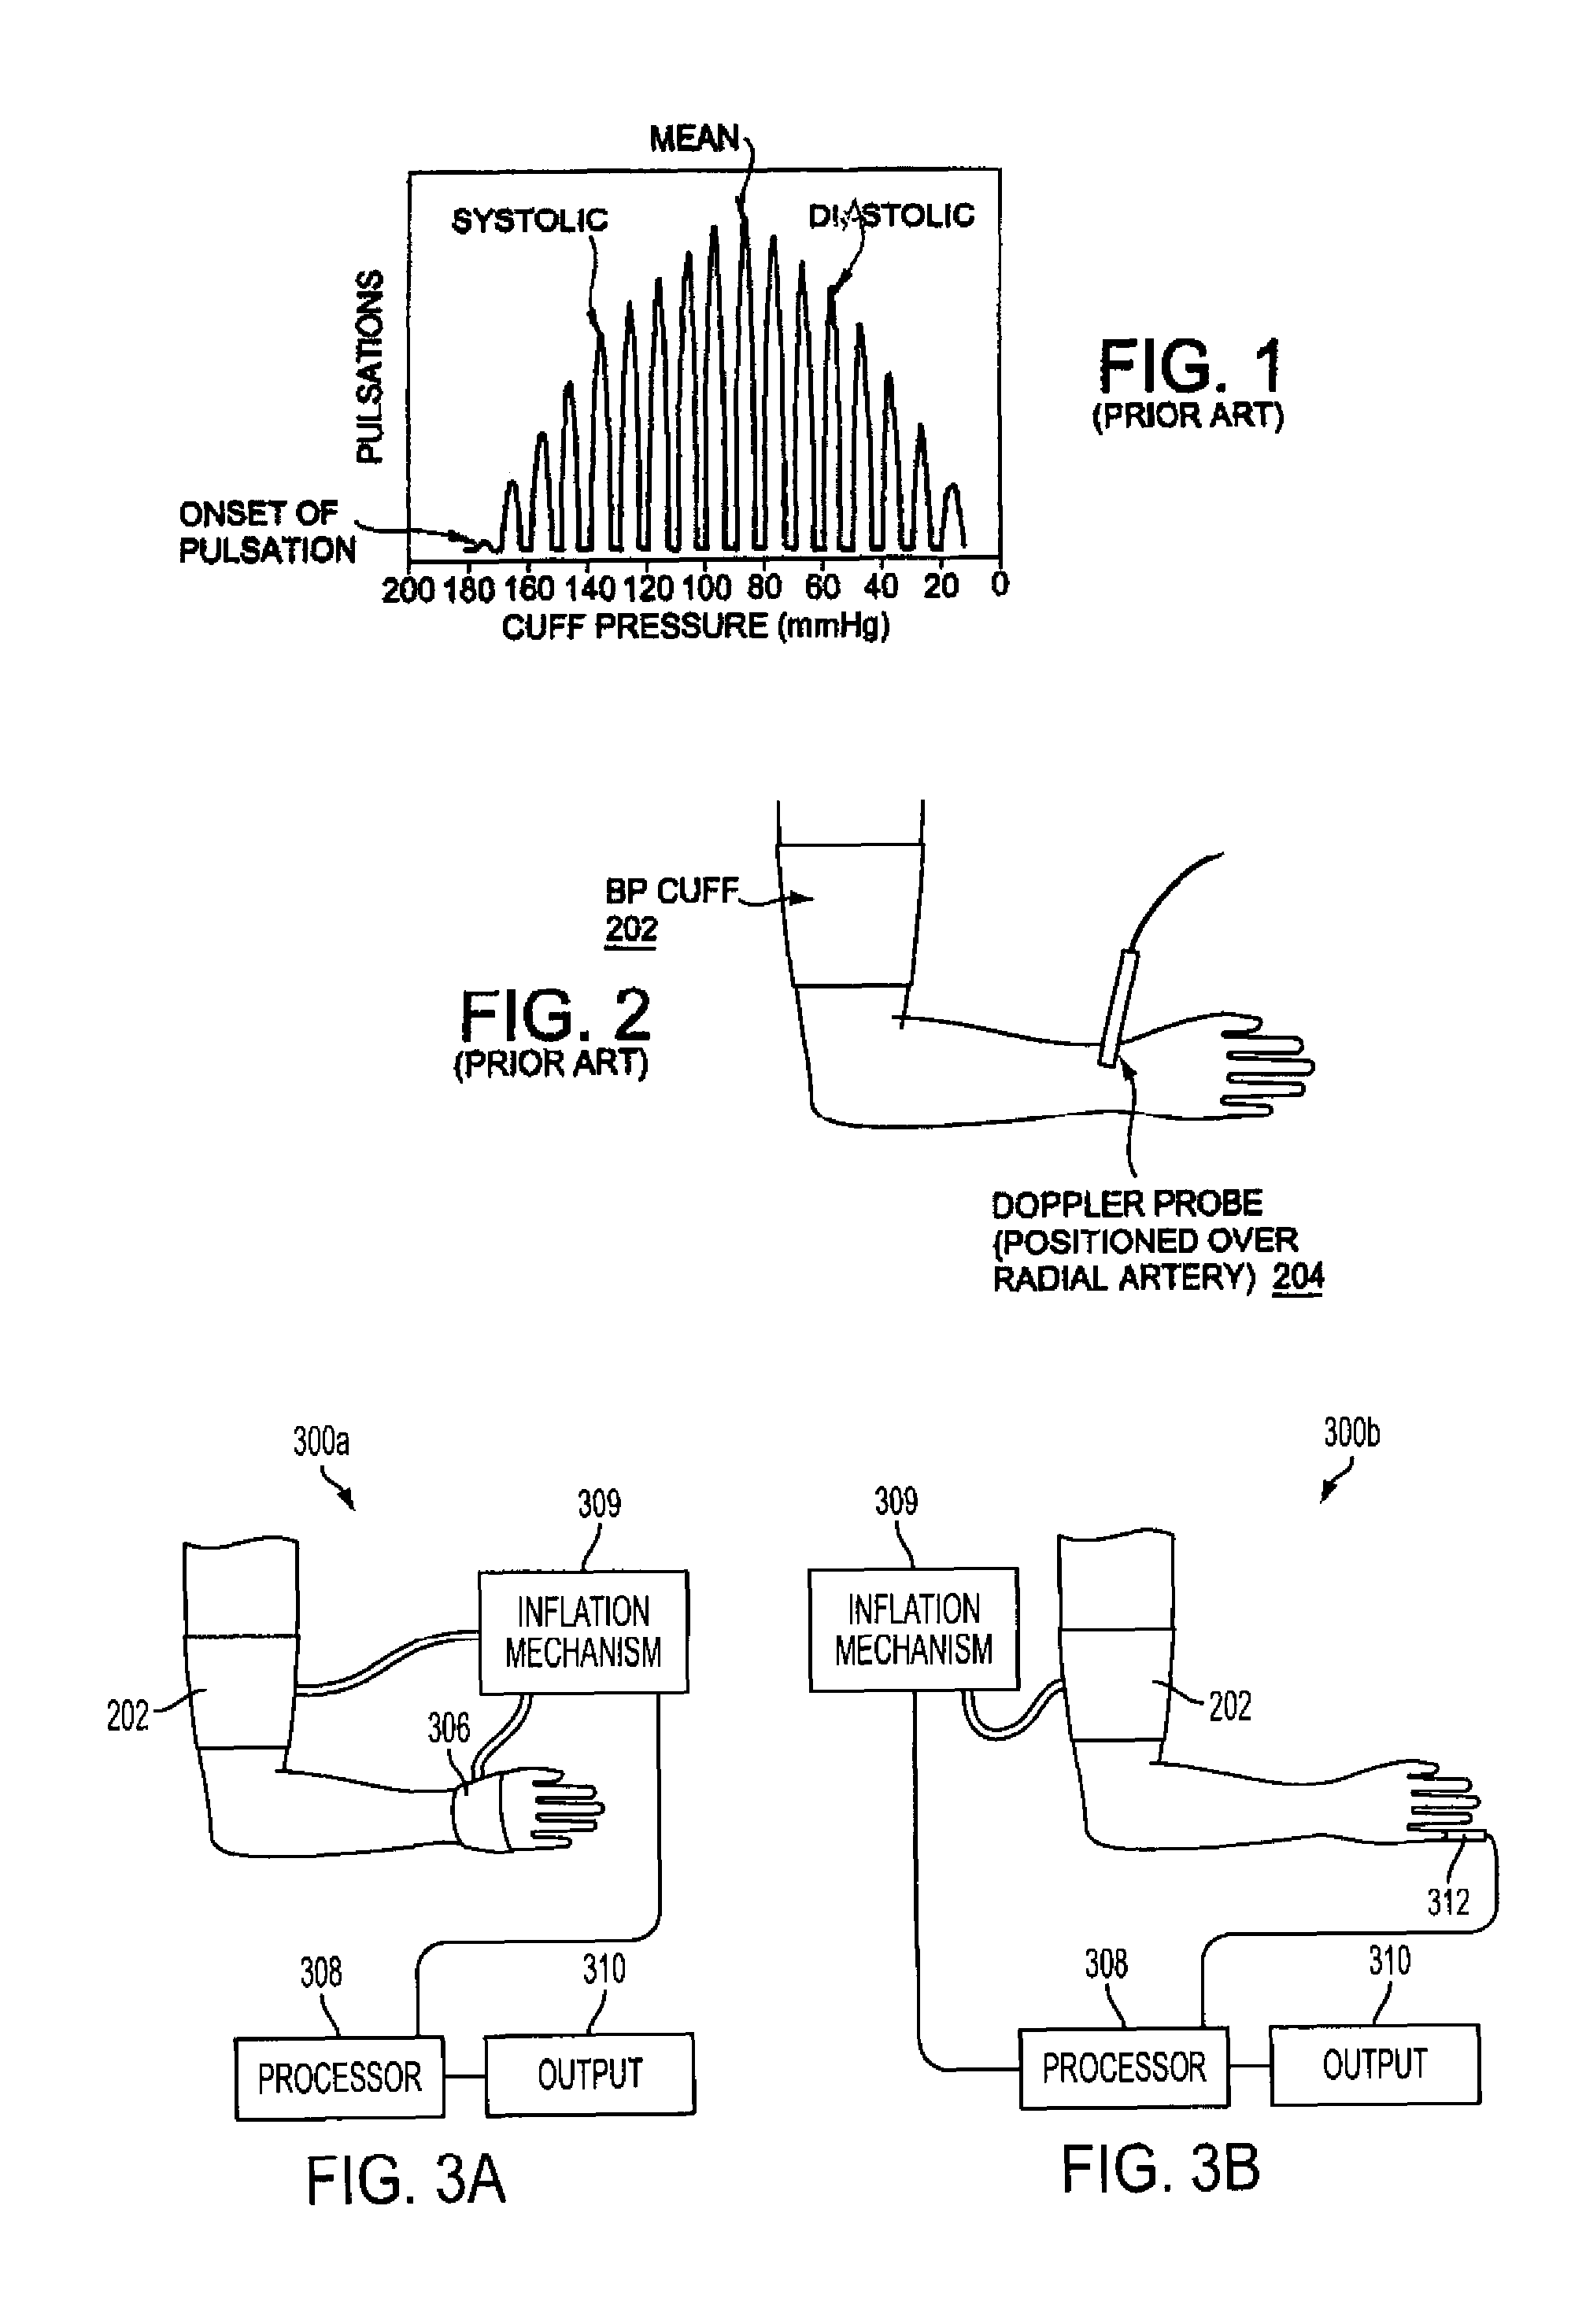 Device for non-invasive measurement of blood pressure and ankle-brachial index